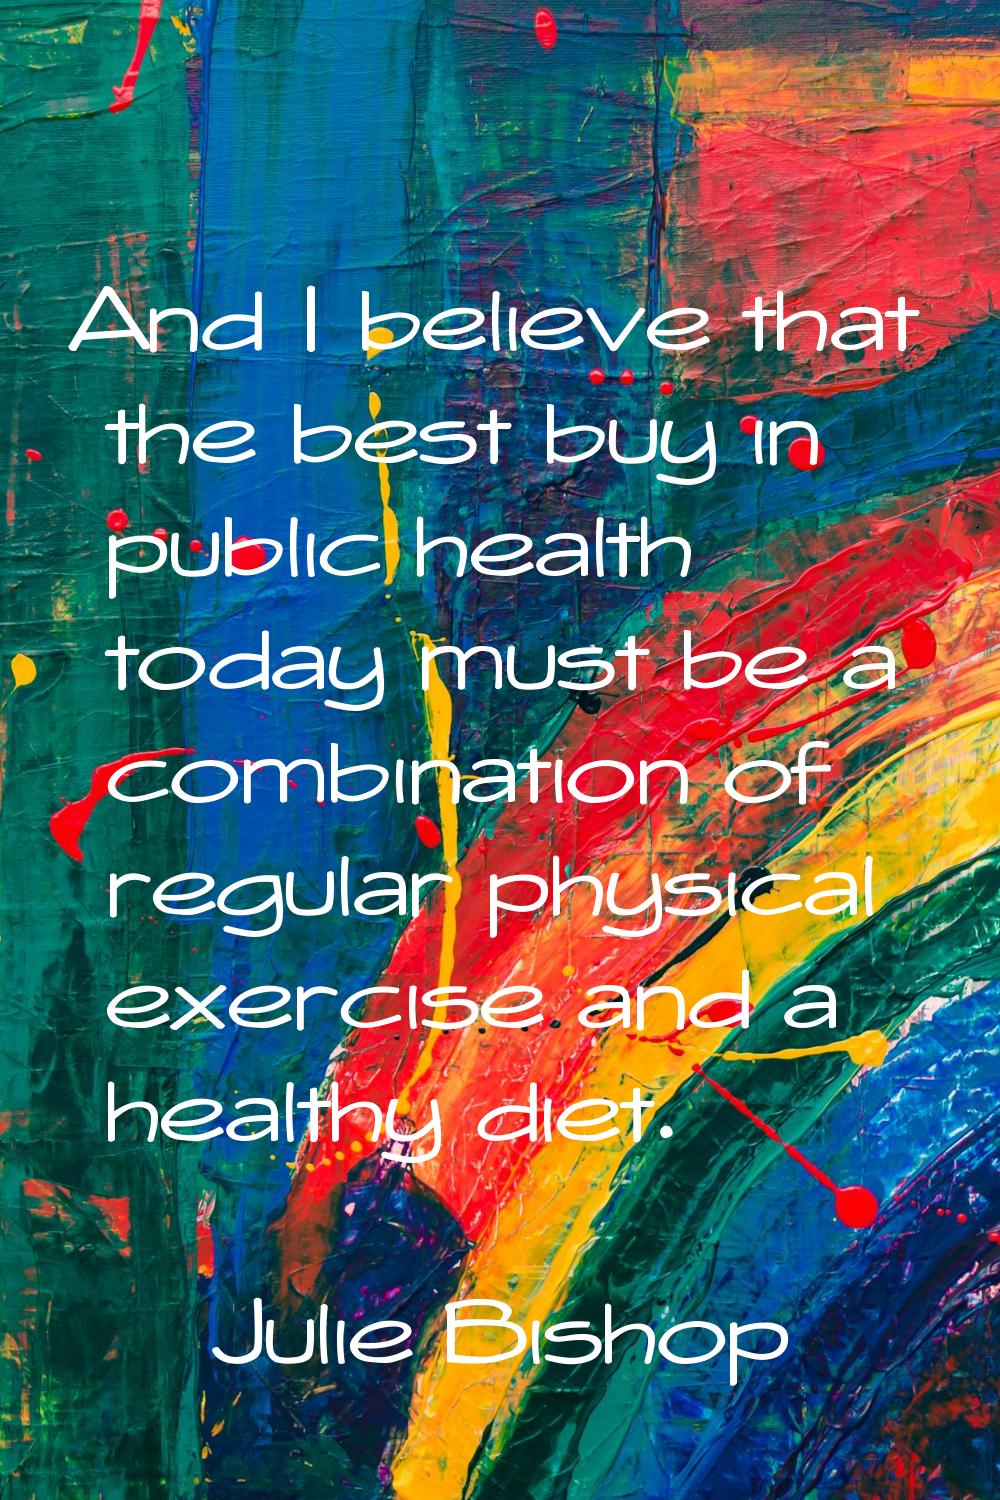 And I believe that the best buy in public health today must be a combination of regular physical ex